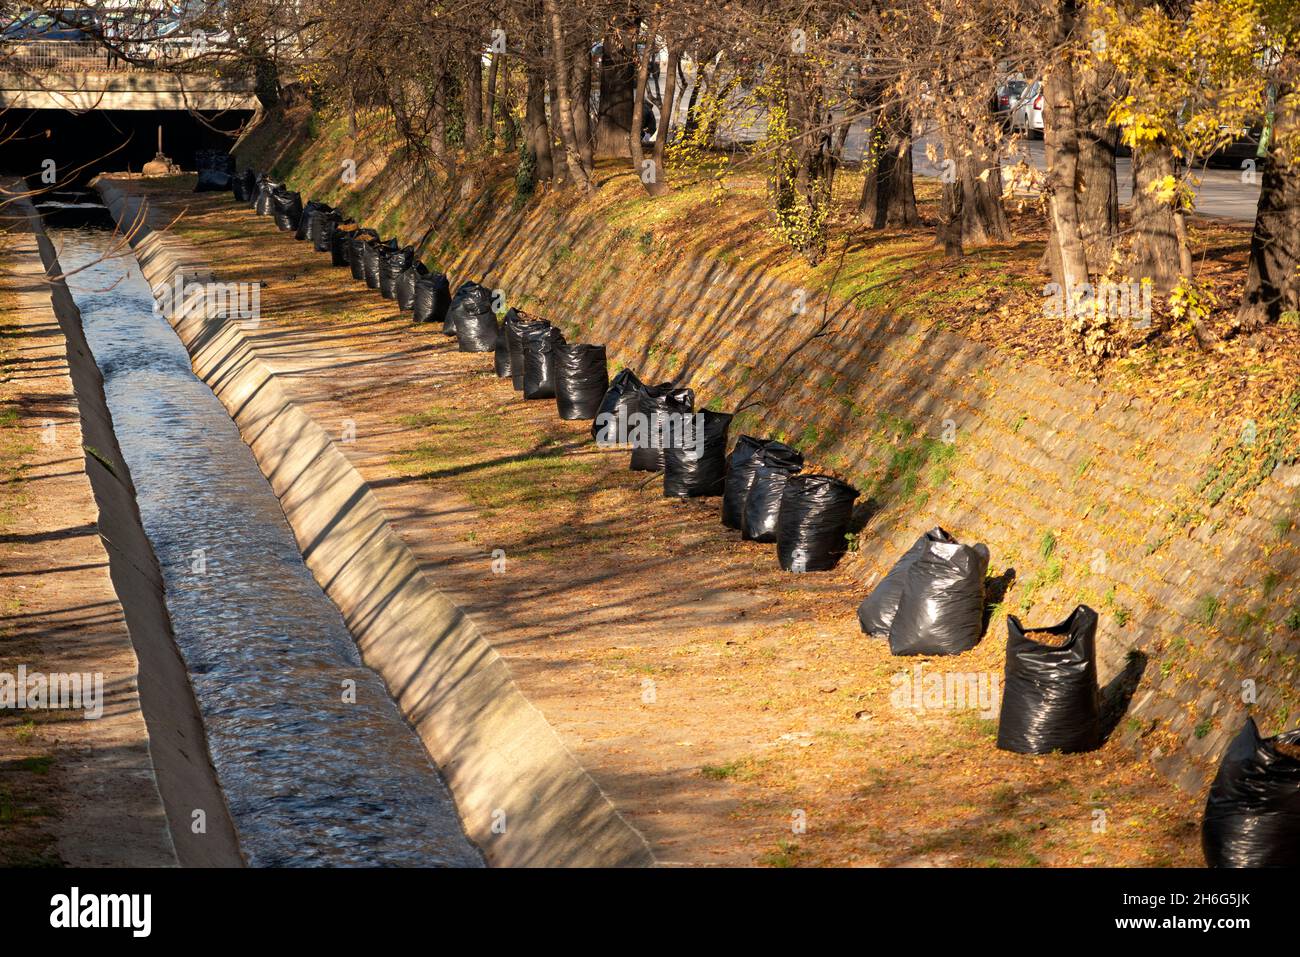 https://c8.alamy.com/comp/2H6G5JK/bagged-leaves-in-black-plastic-bags-full-of-dried-leaves-lined-and-ready-for-collection-by-a-river-canal-in-downtown-sofia-bulgaria-eastern-europe-2H6G5JK.jpg